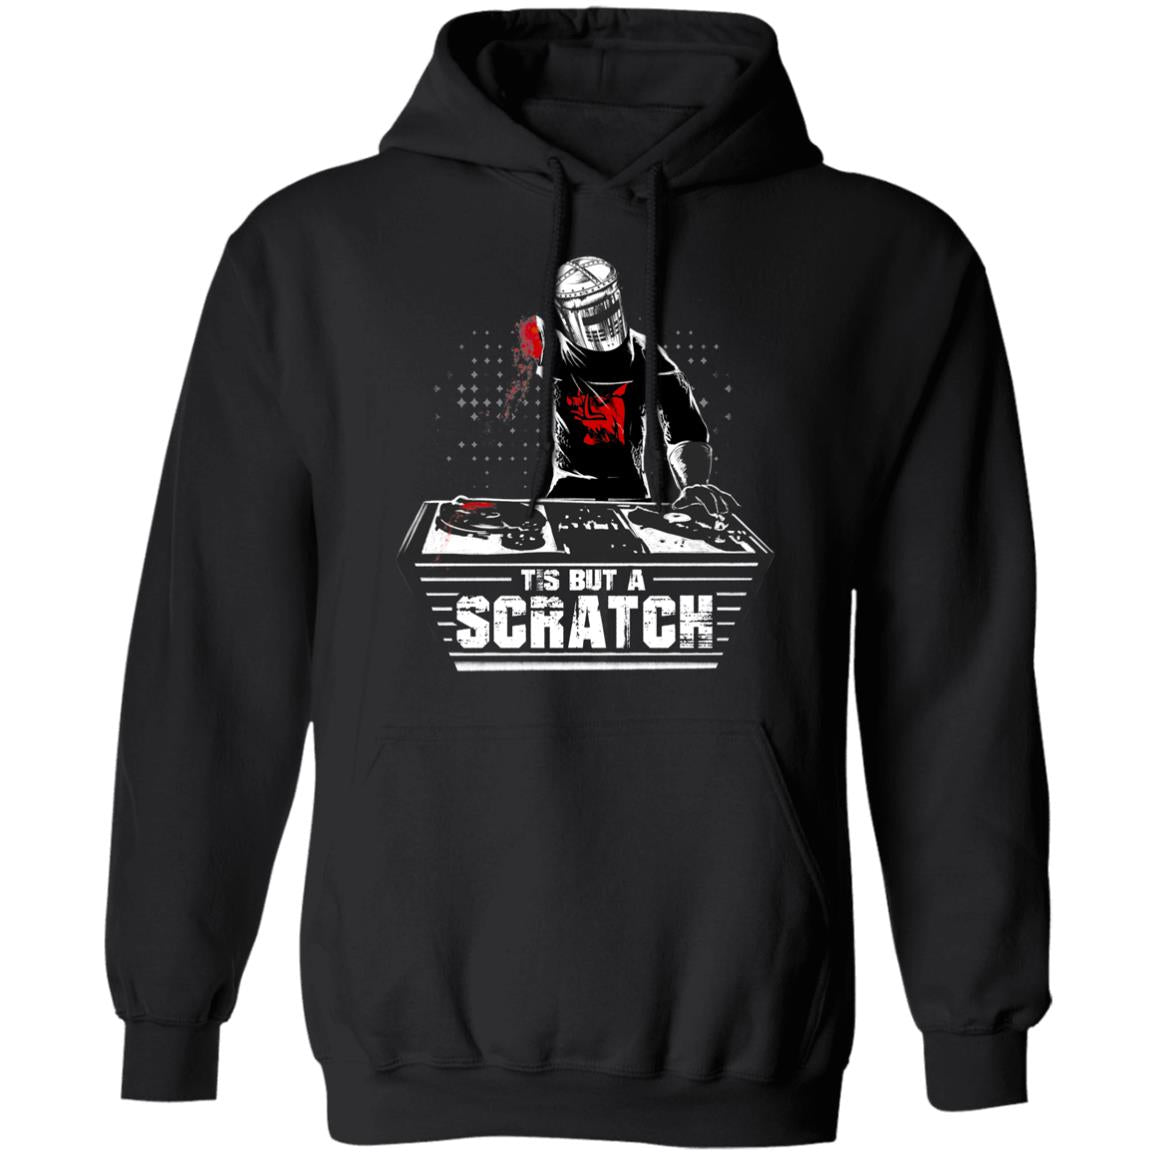 Tis But a Scratch Hoodie – The Dude's Threads